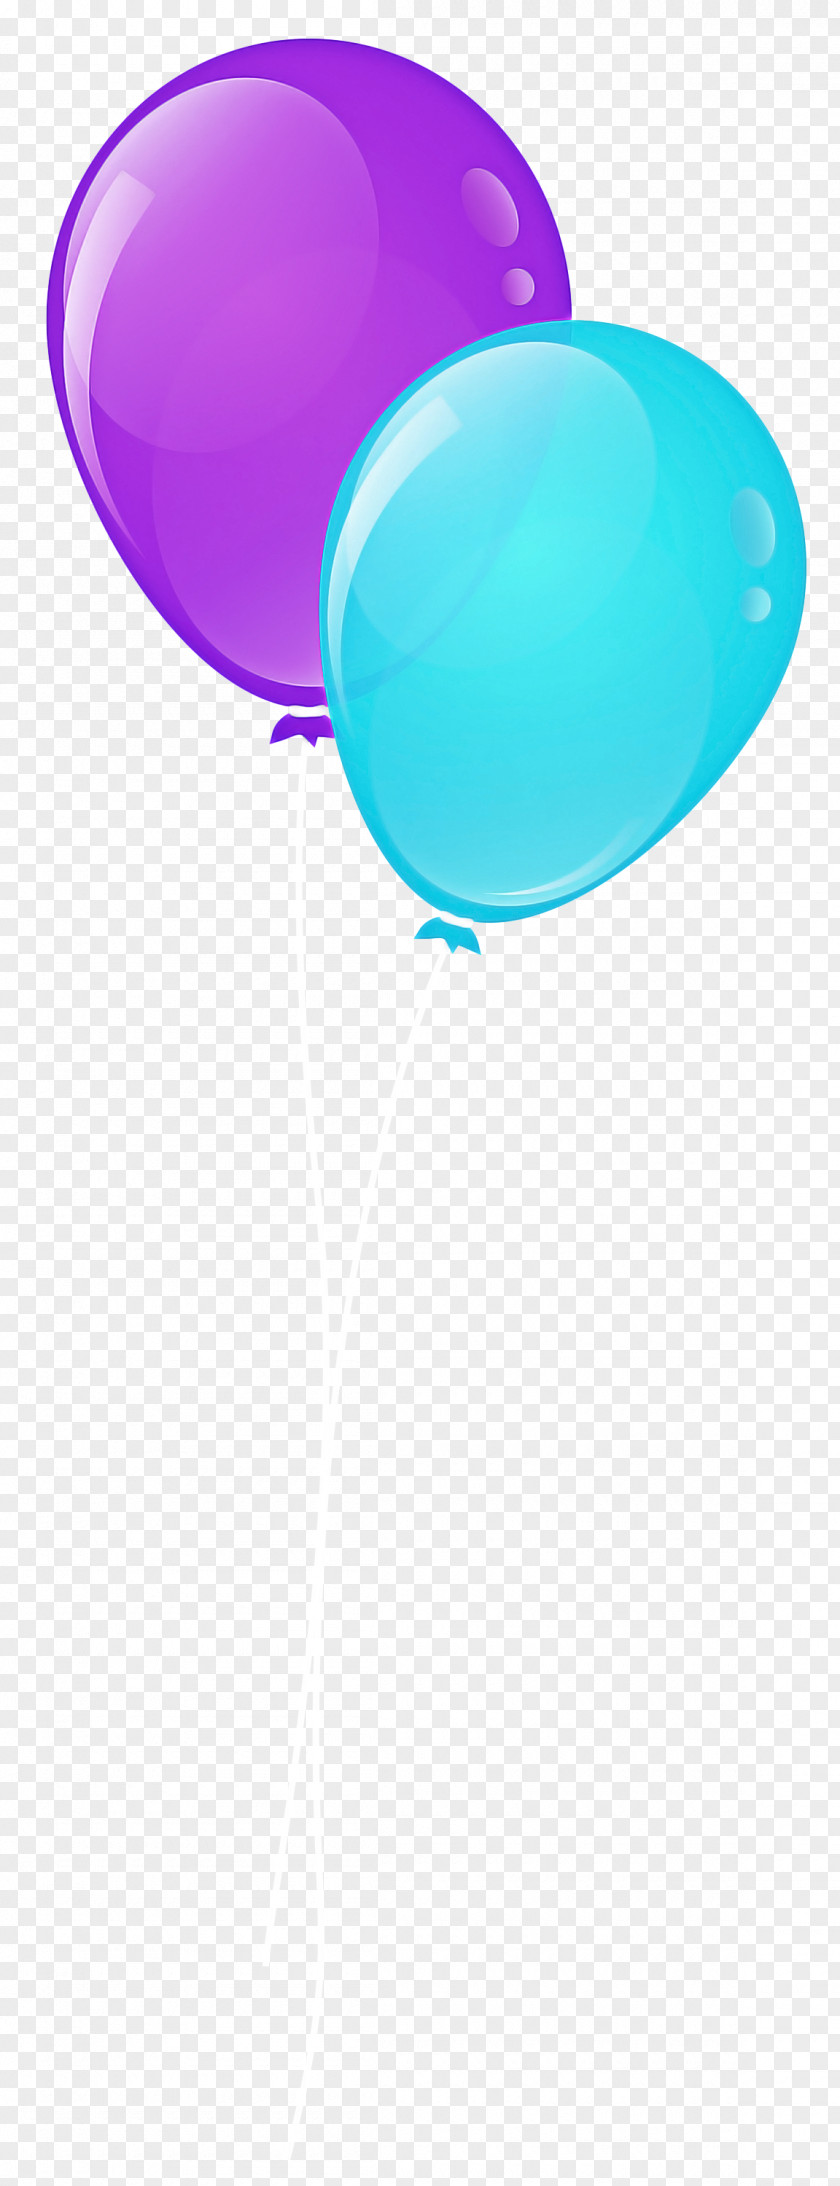 Material Property Party Supply Blue Balloon PNG